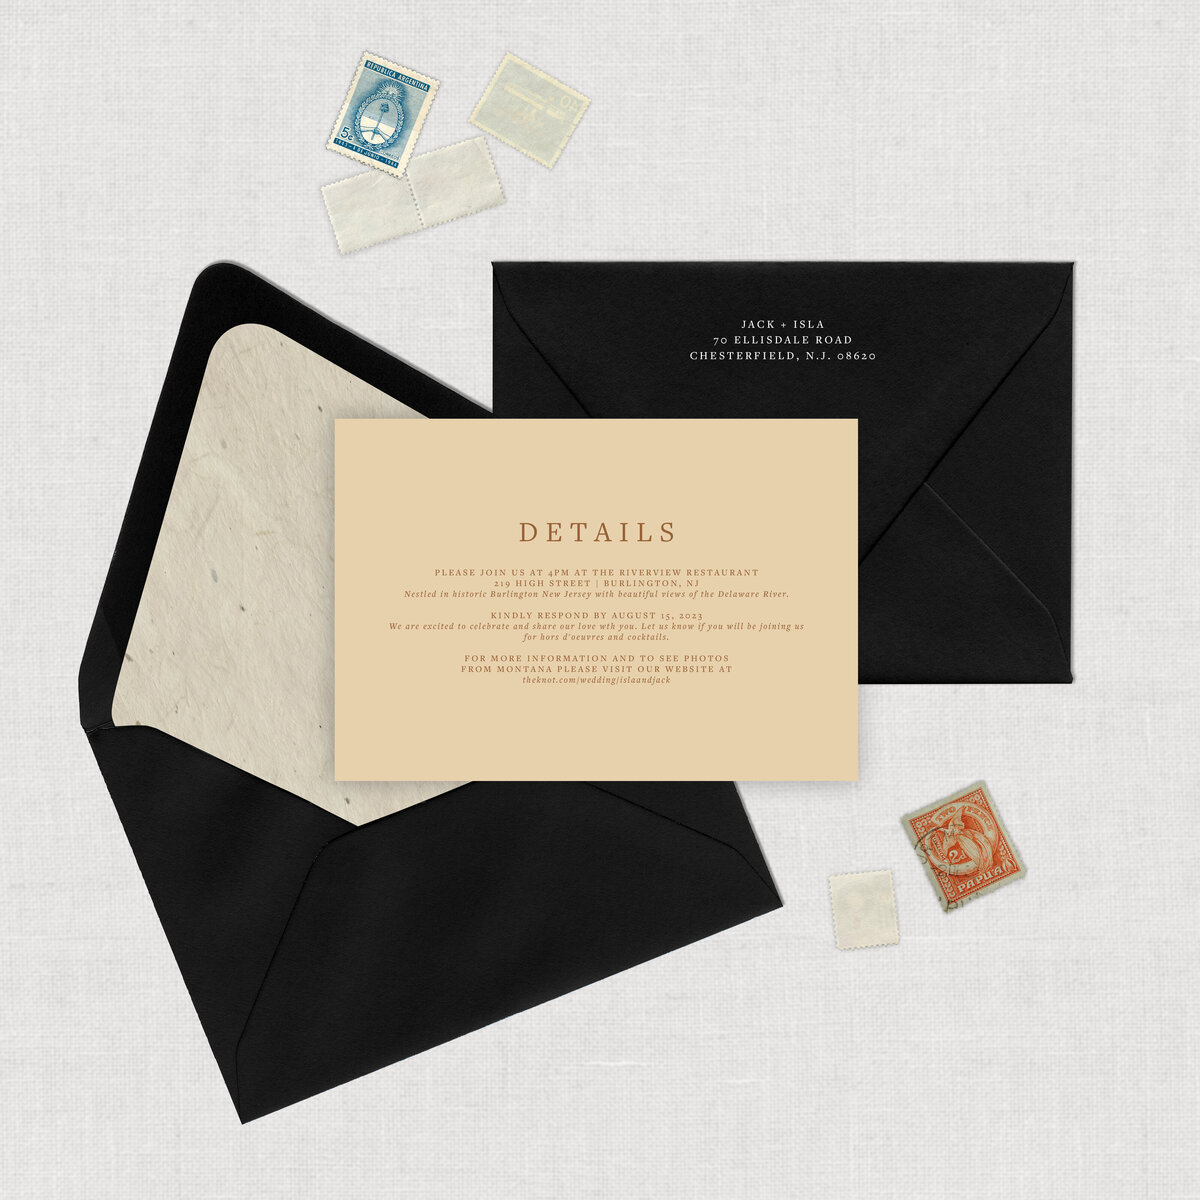 Wedding Elopement wedding invitation with black wedding mailing envelope and textured envelope liner with printed white addressing.